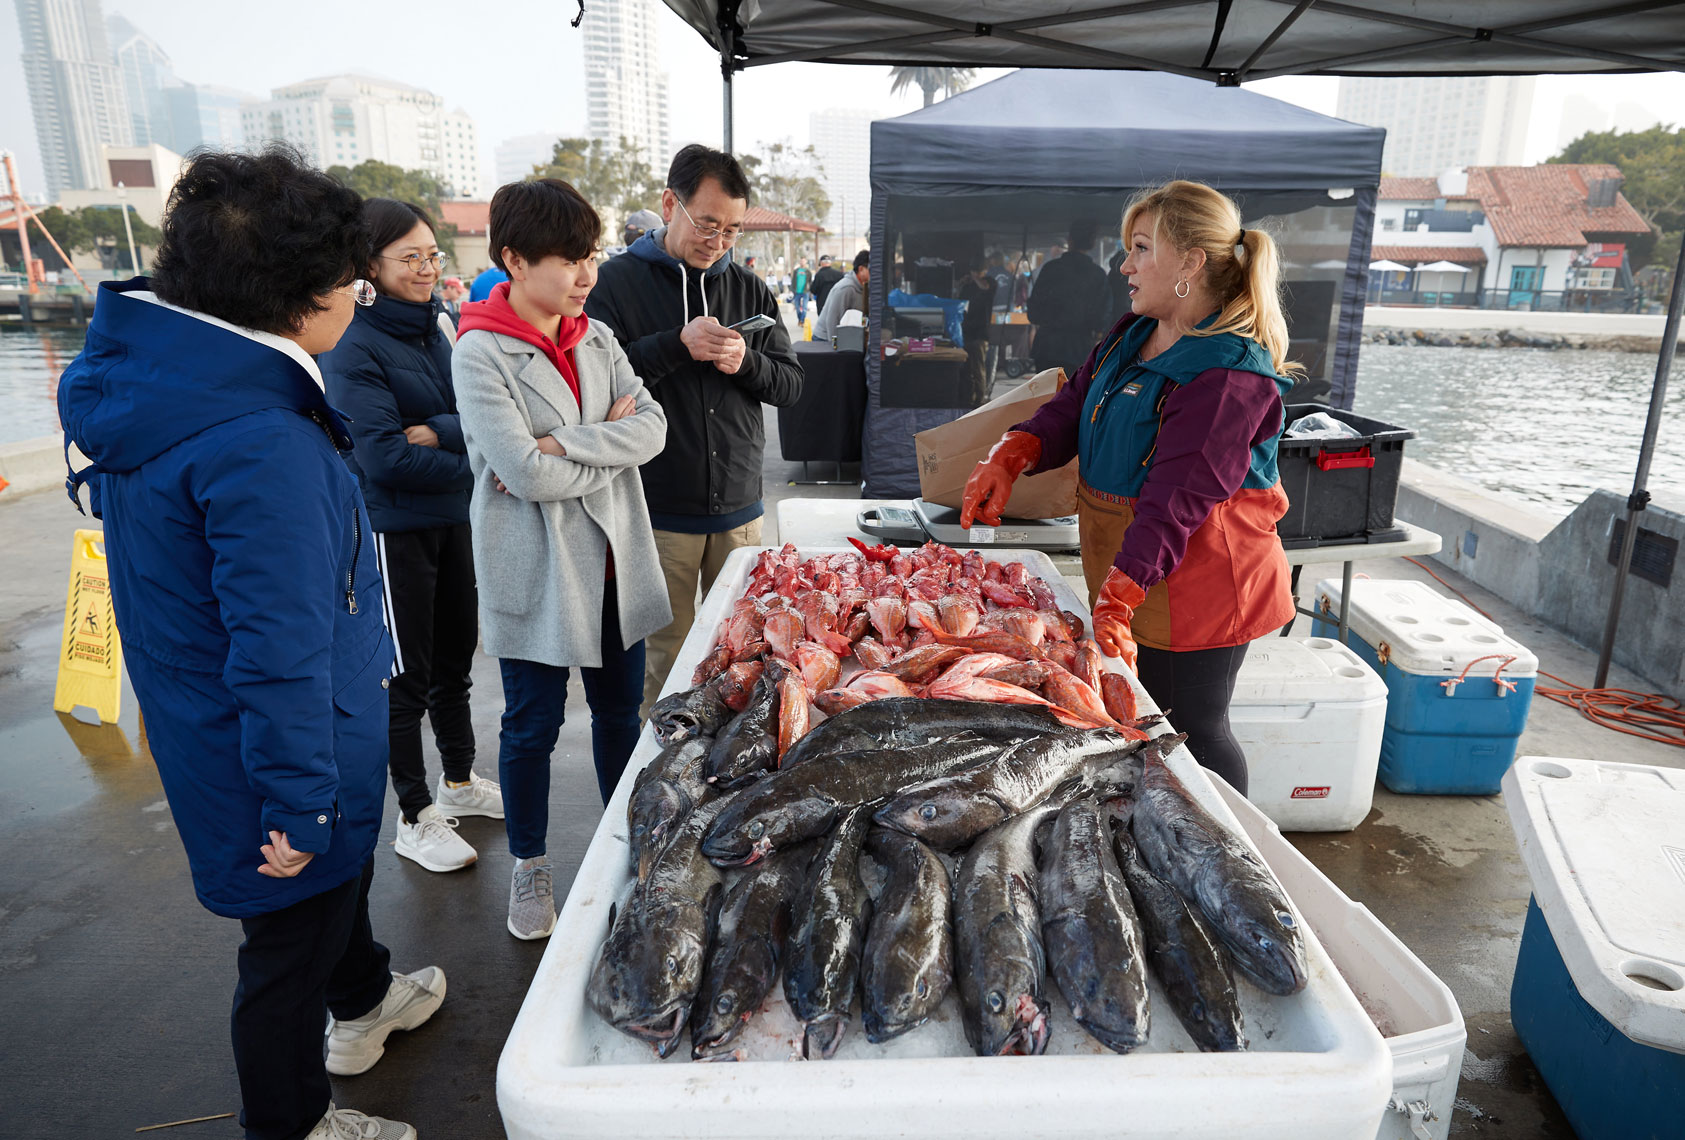 Customers Shop for Fresh Seafood at Fish Market